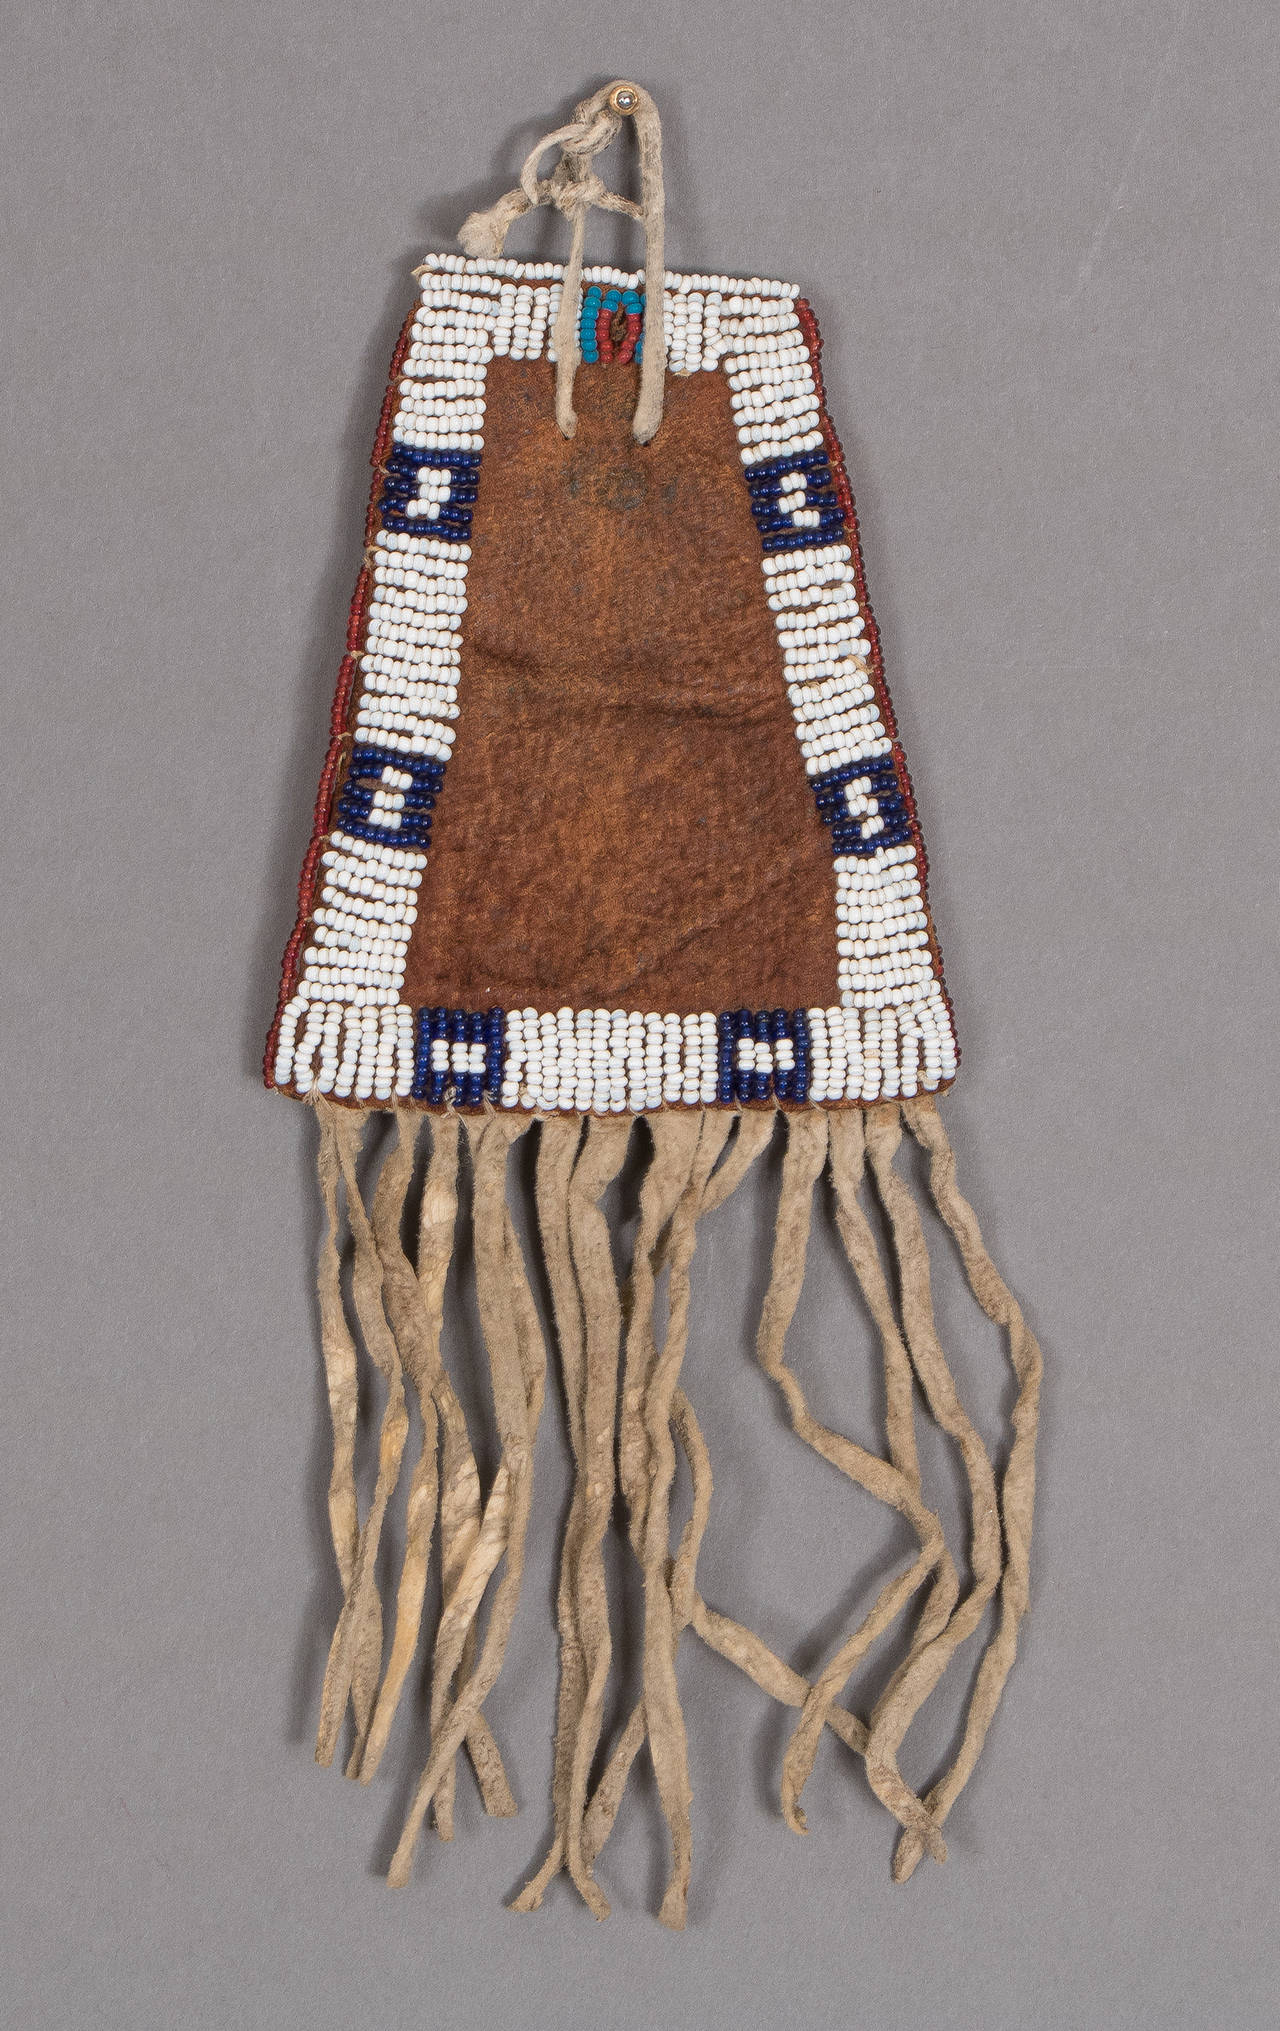 A charming pictorial bag created from leather with glass trade beads and fringed with native-tanned hide. Two horses adorn the front of the bag with geometric elements on the back. The Sioux Indians were nomadic and are associated with vast areas of